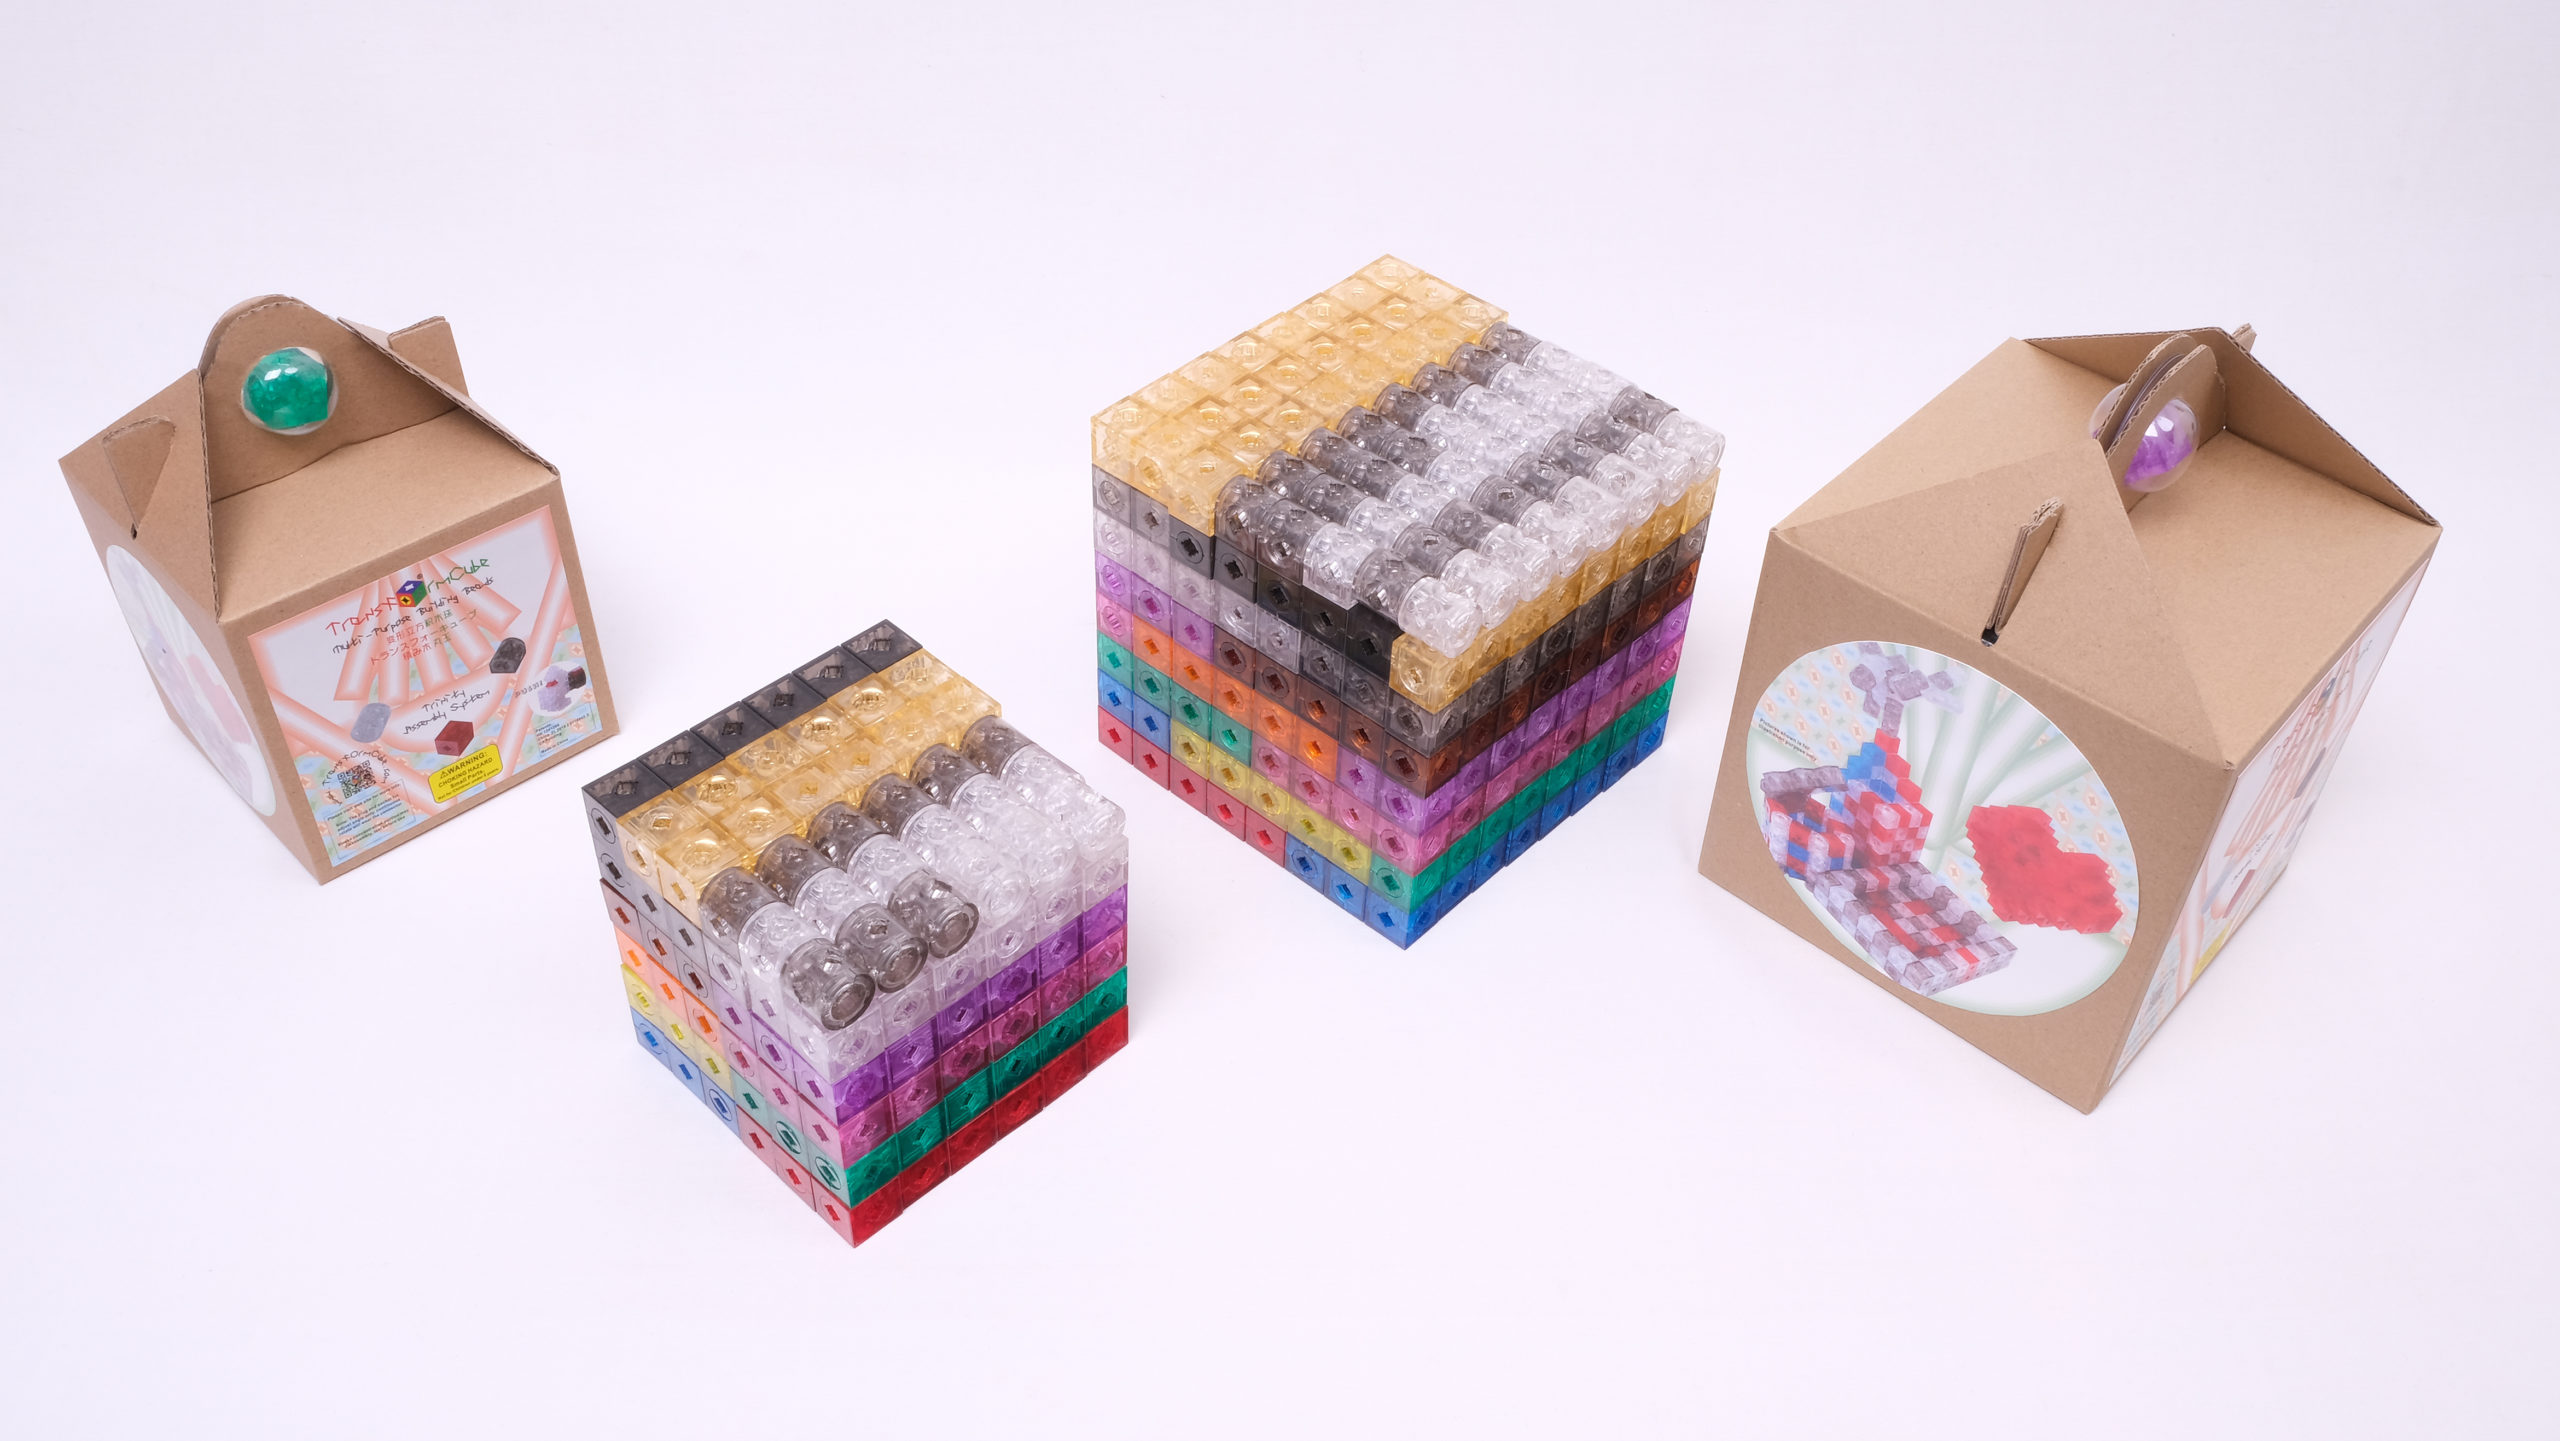 Compare packages of 216pcs and 512pcs building beads and content arrangement